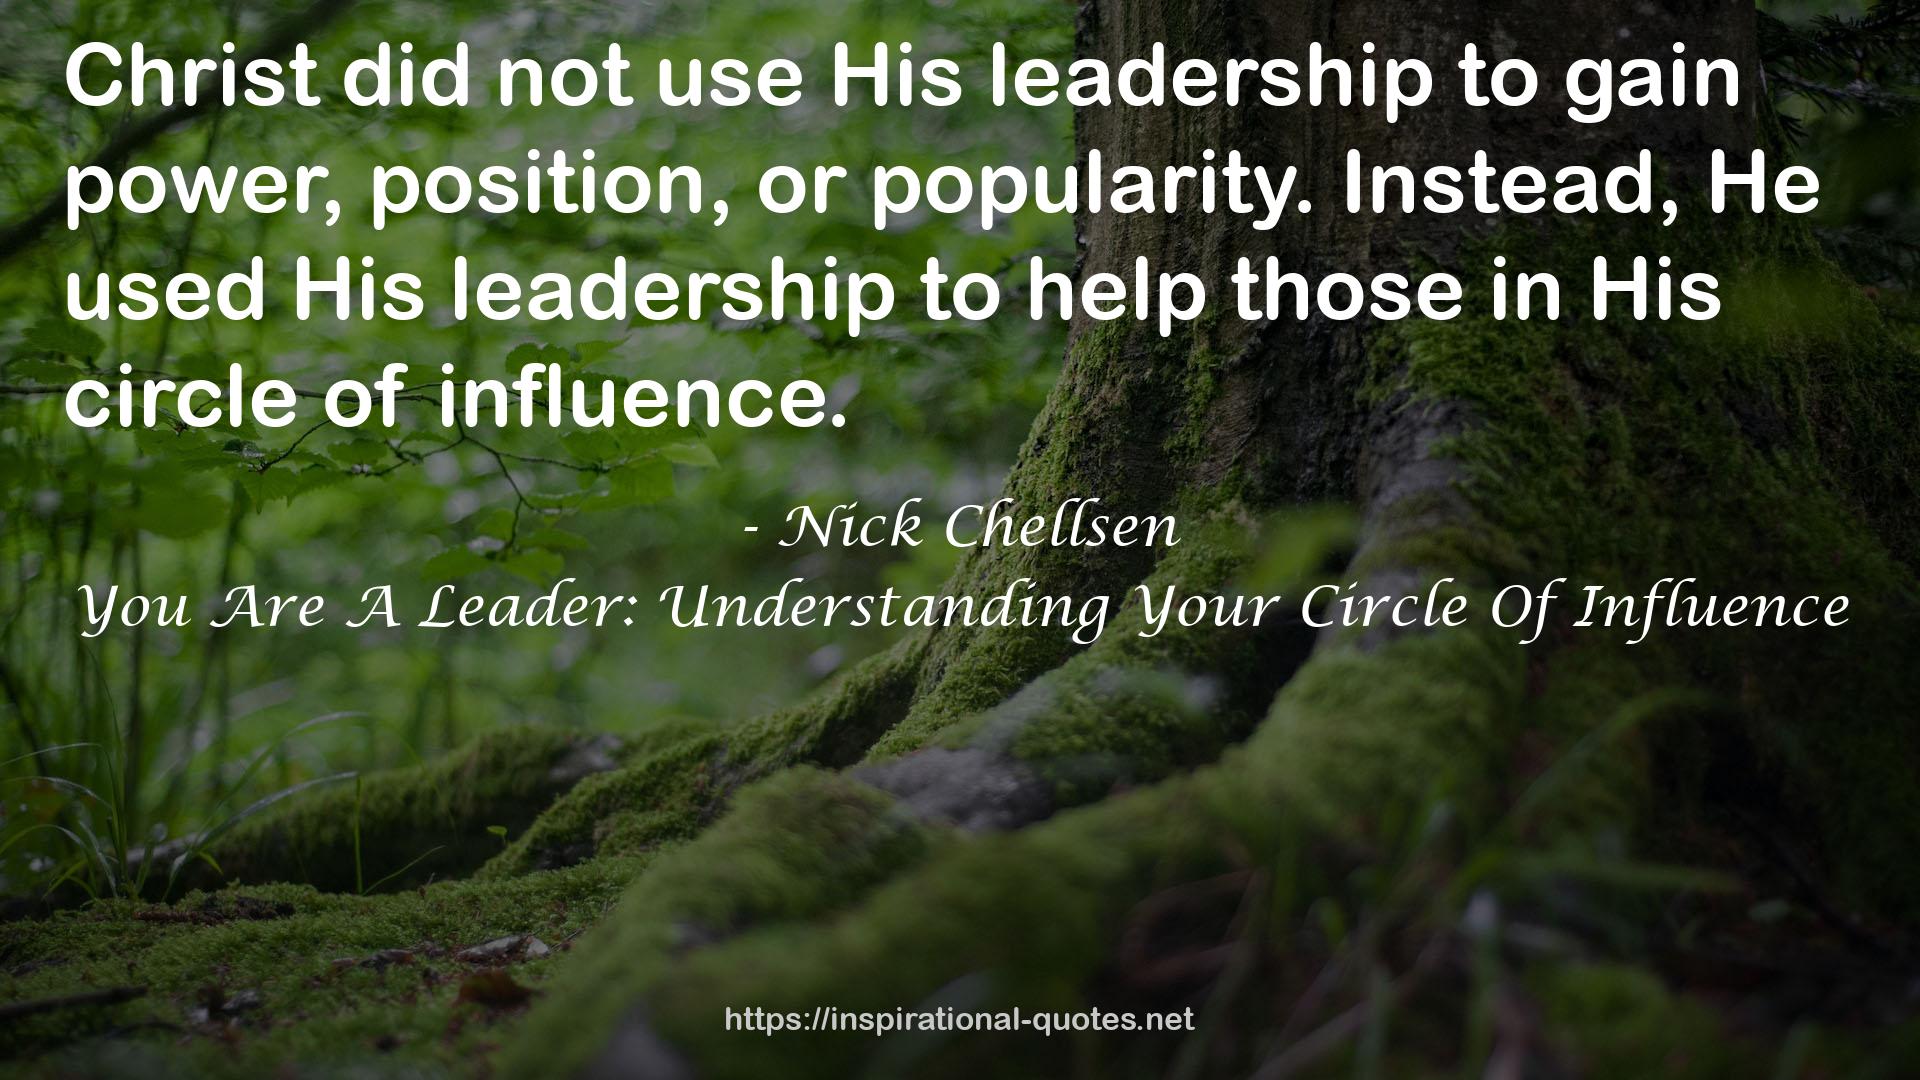 You Are A Leader: Understanding Your Circle Of Influence QUOTES